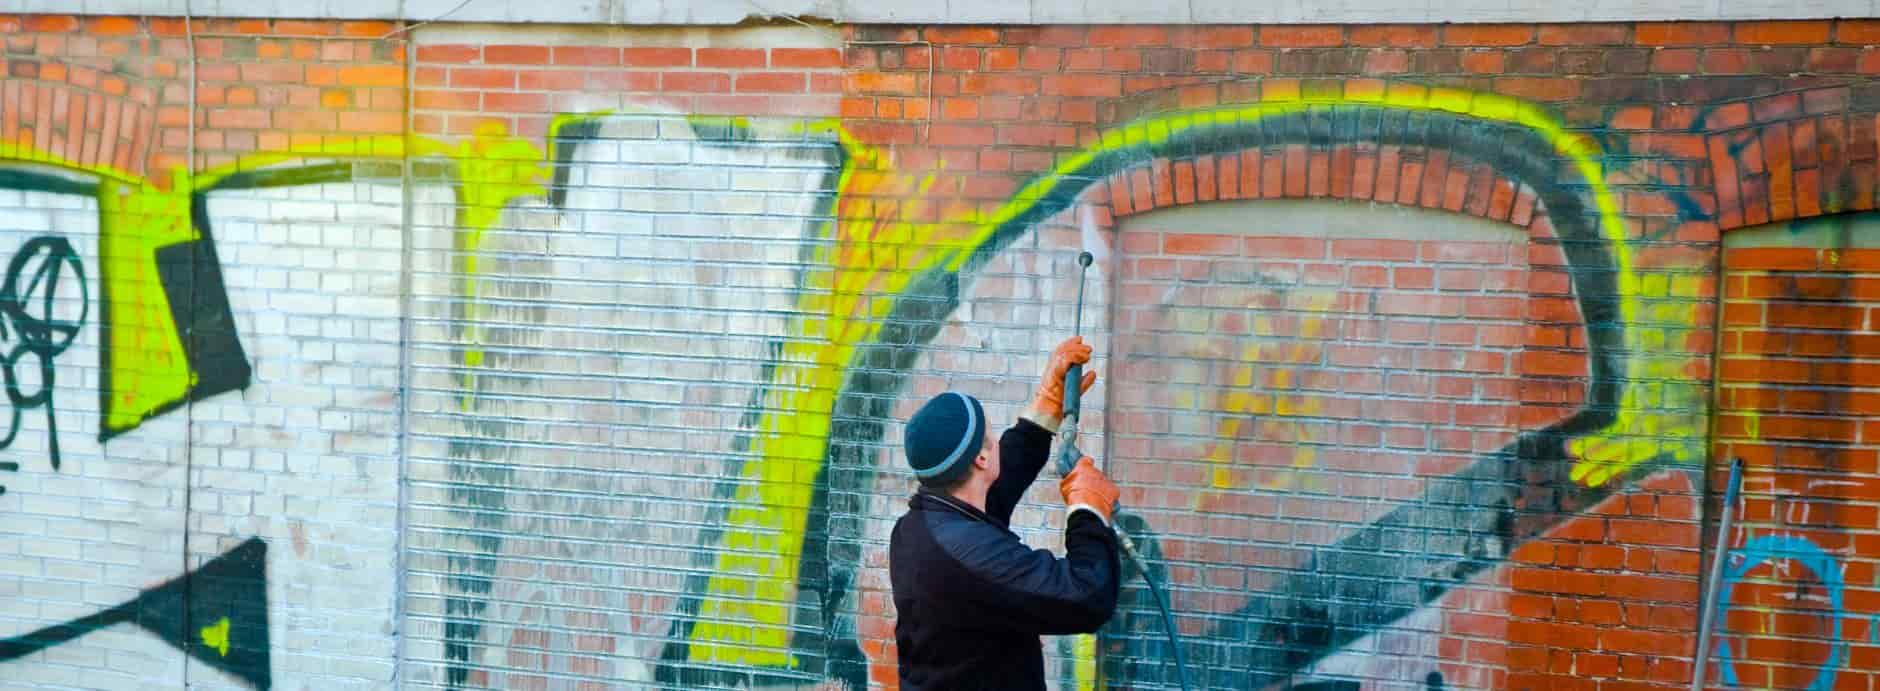 Graffiti Removal in Prudhoe